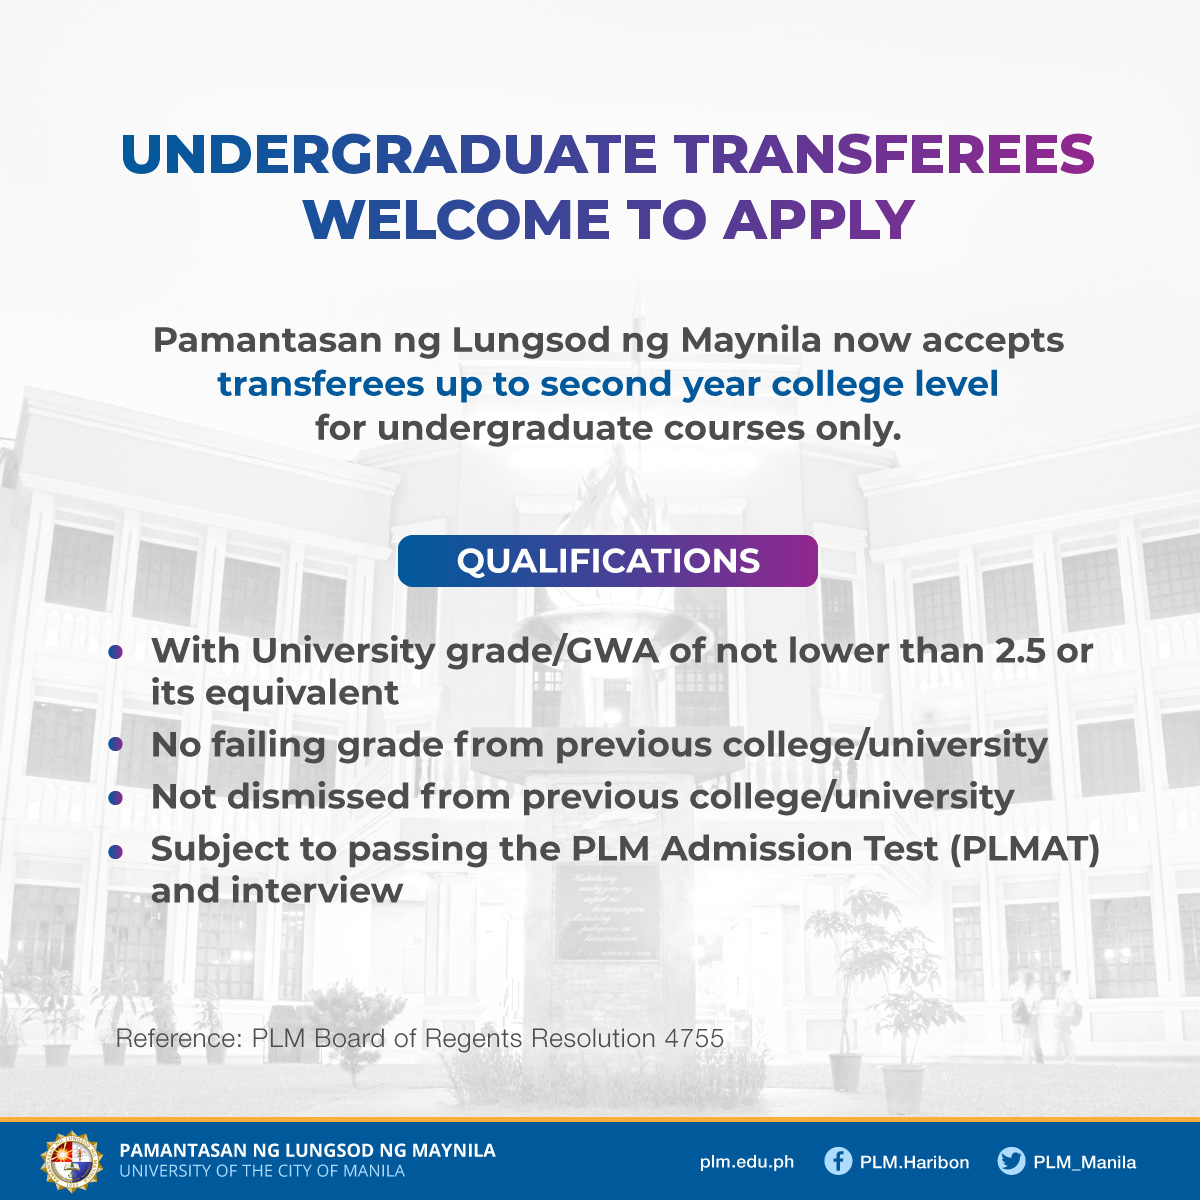 Transferees welcome to apply until Aug. 13 